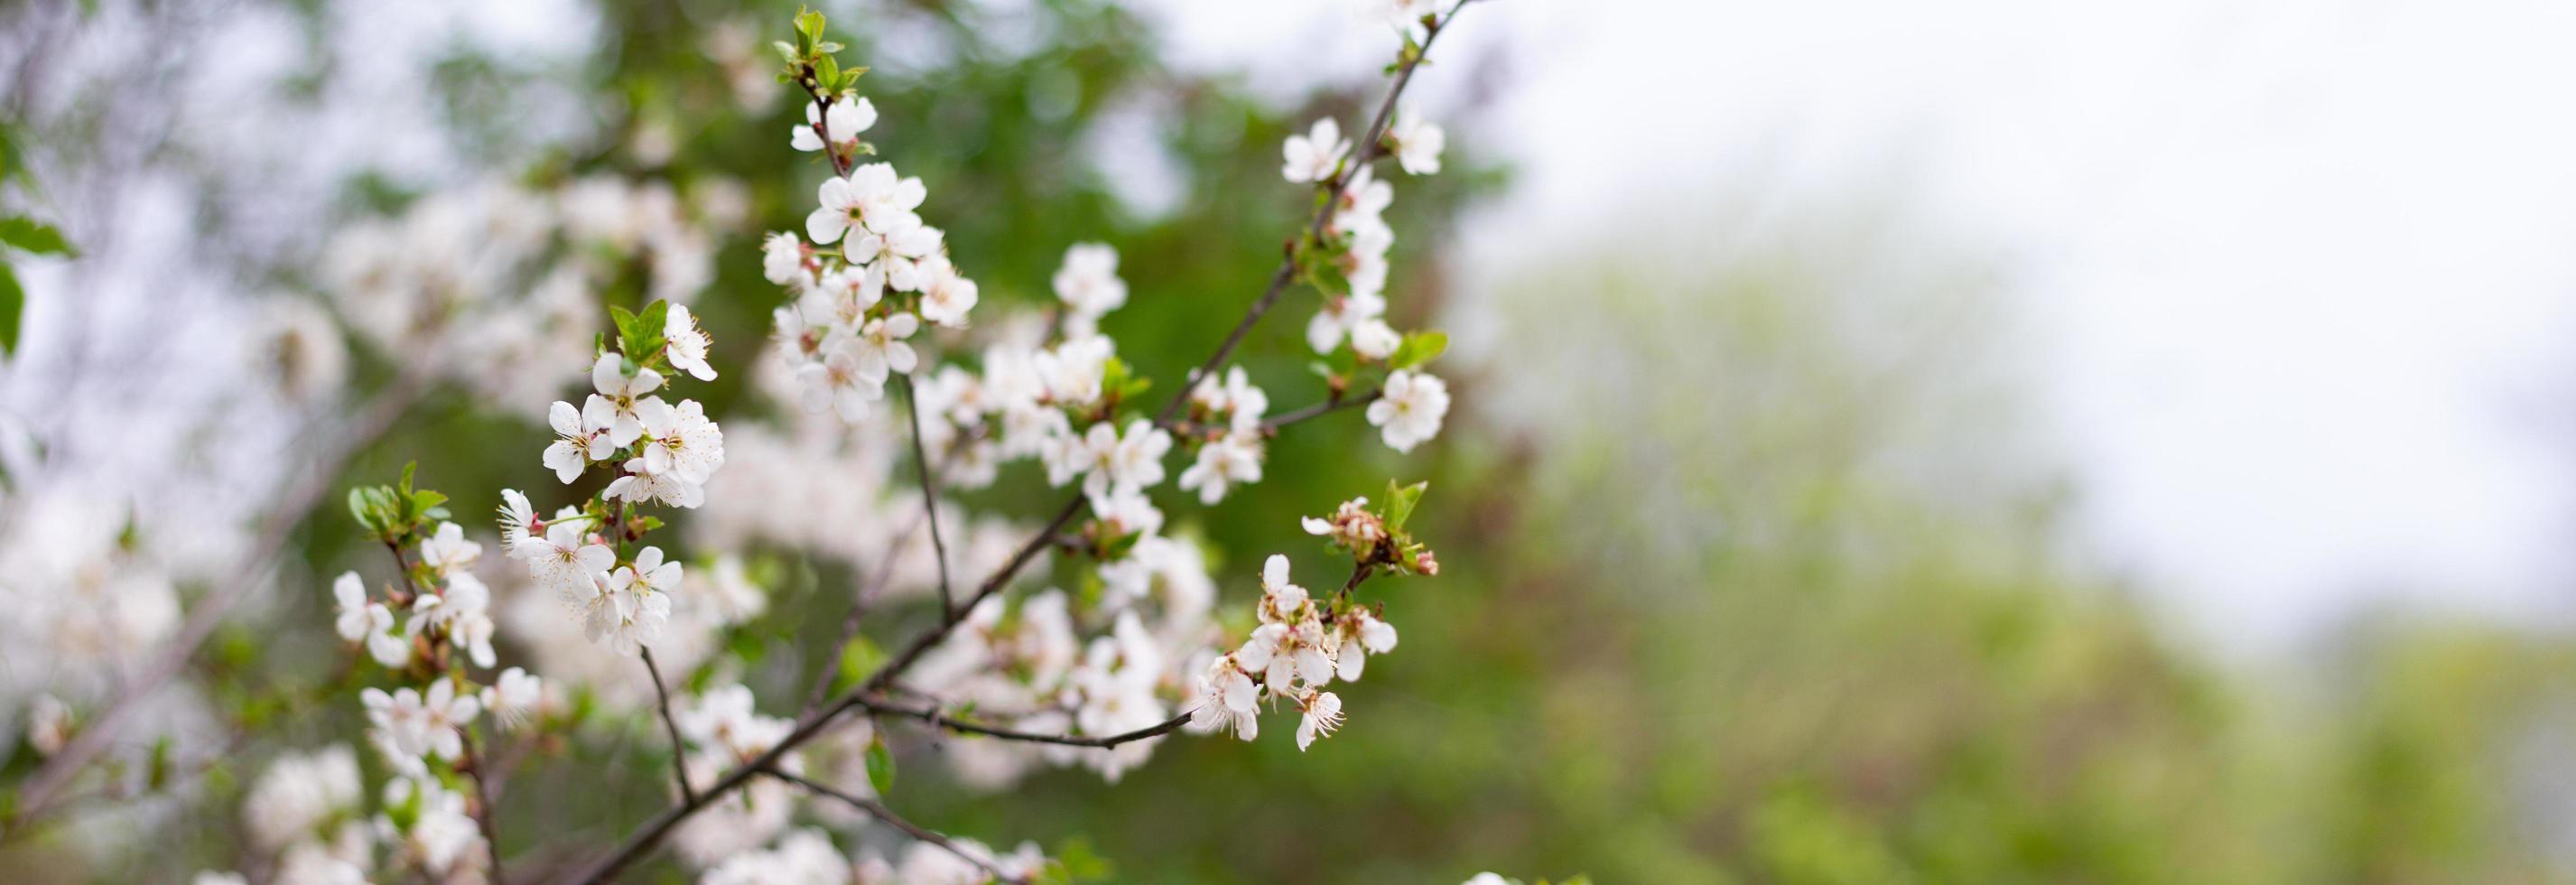 Panorama of flowering trees in the spring season. White flowers on tree branches with copy space. photo